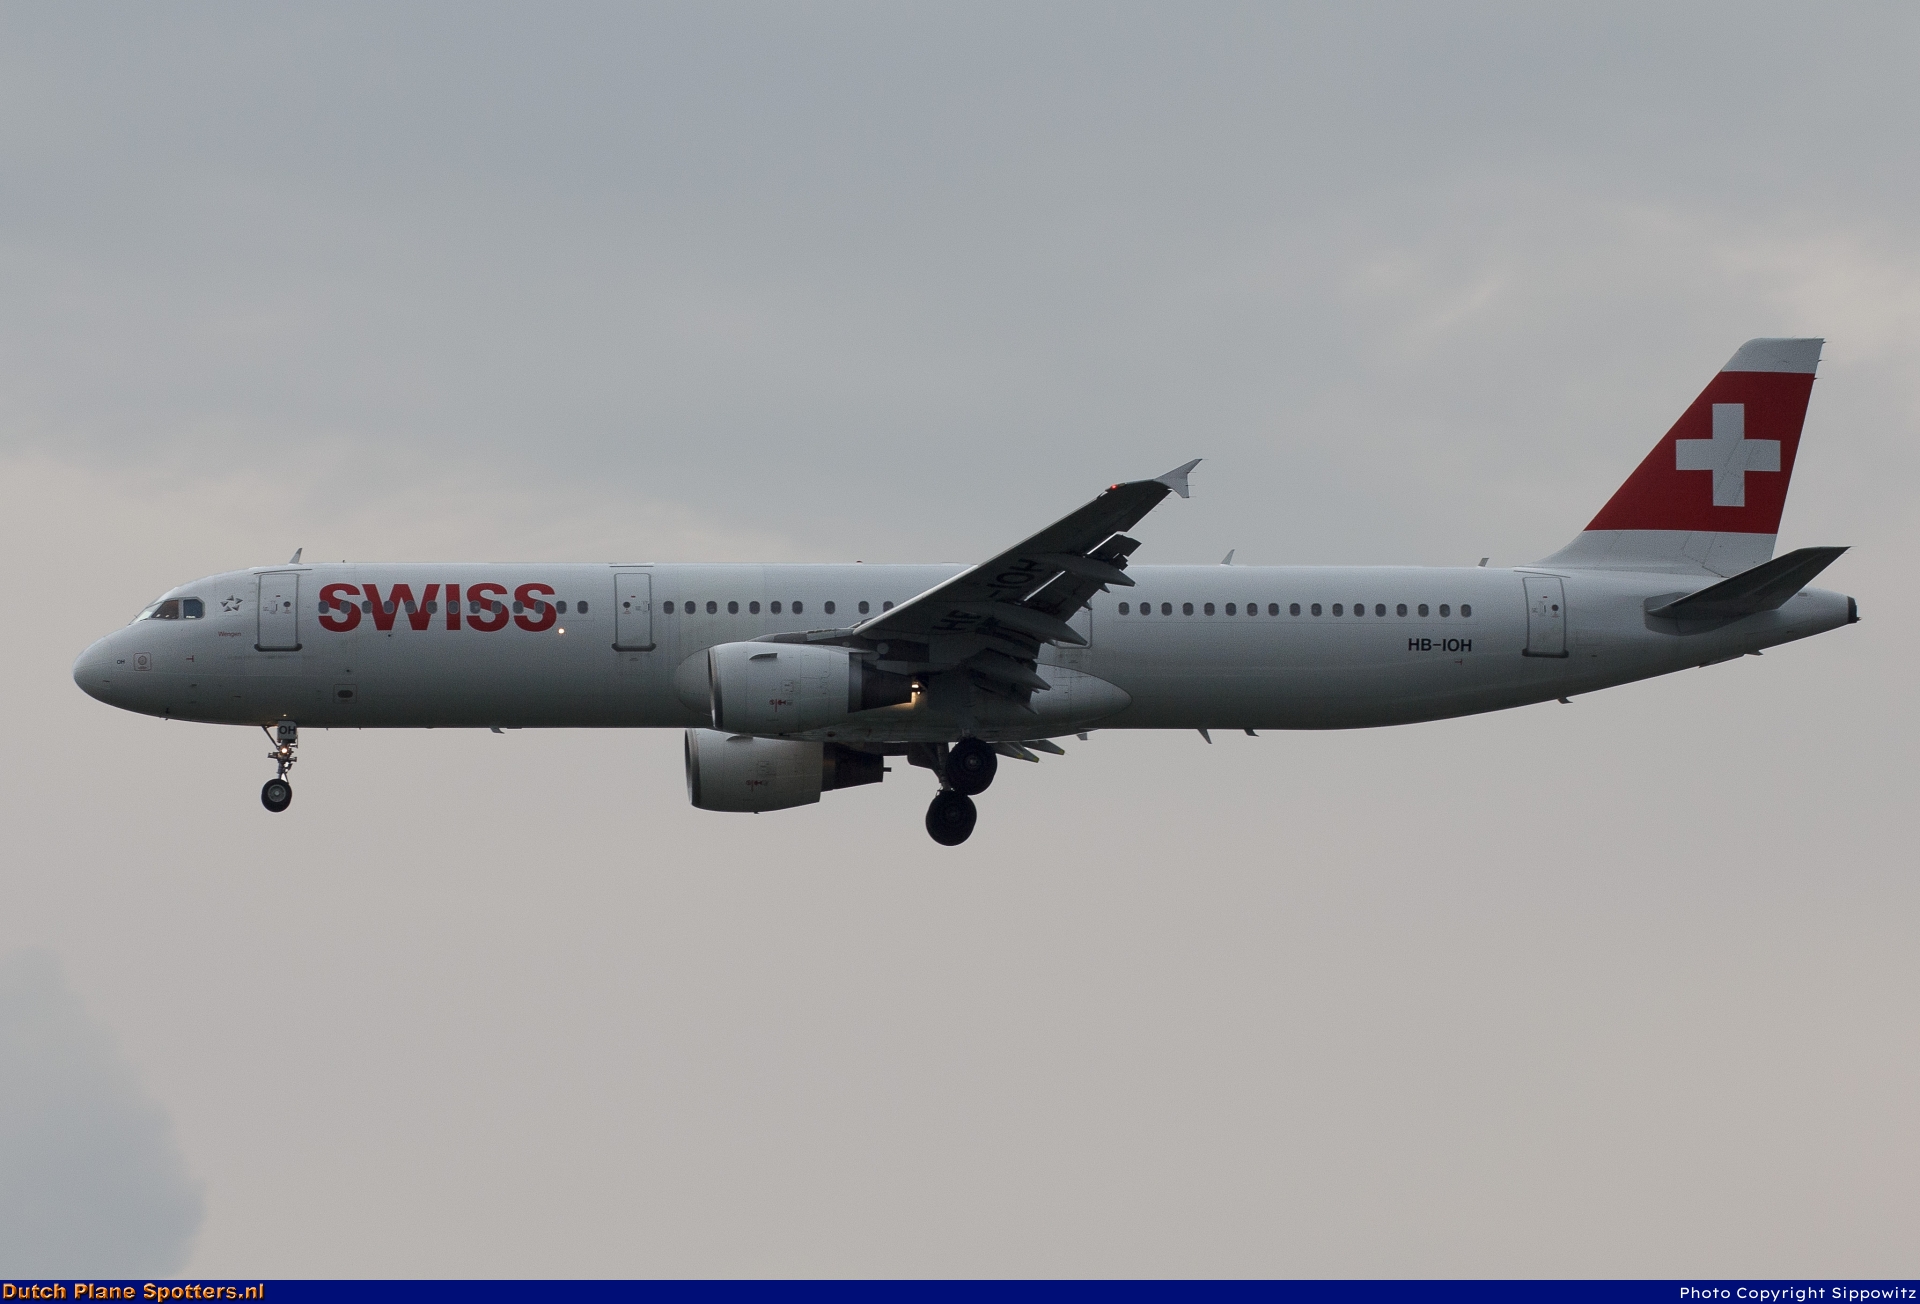 HB-IOH Airbus A321 Swiss International Air Lines by Sippowitz